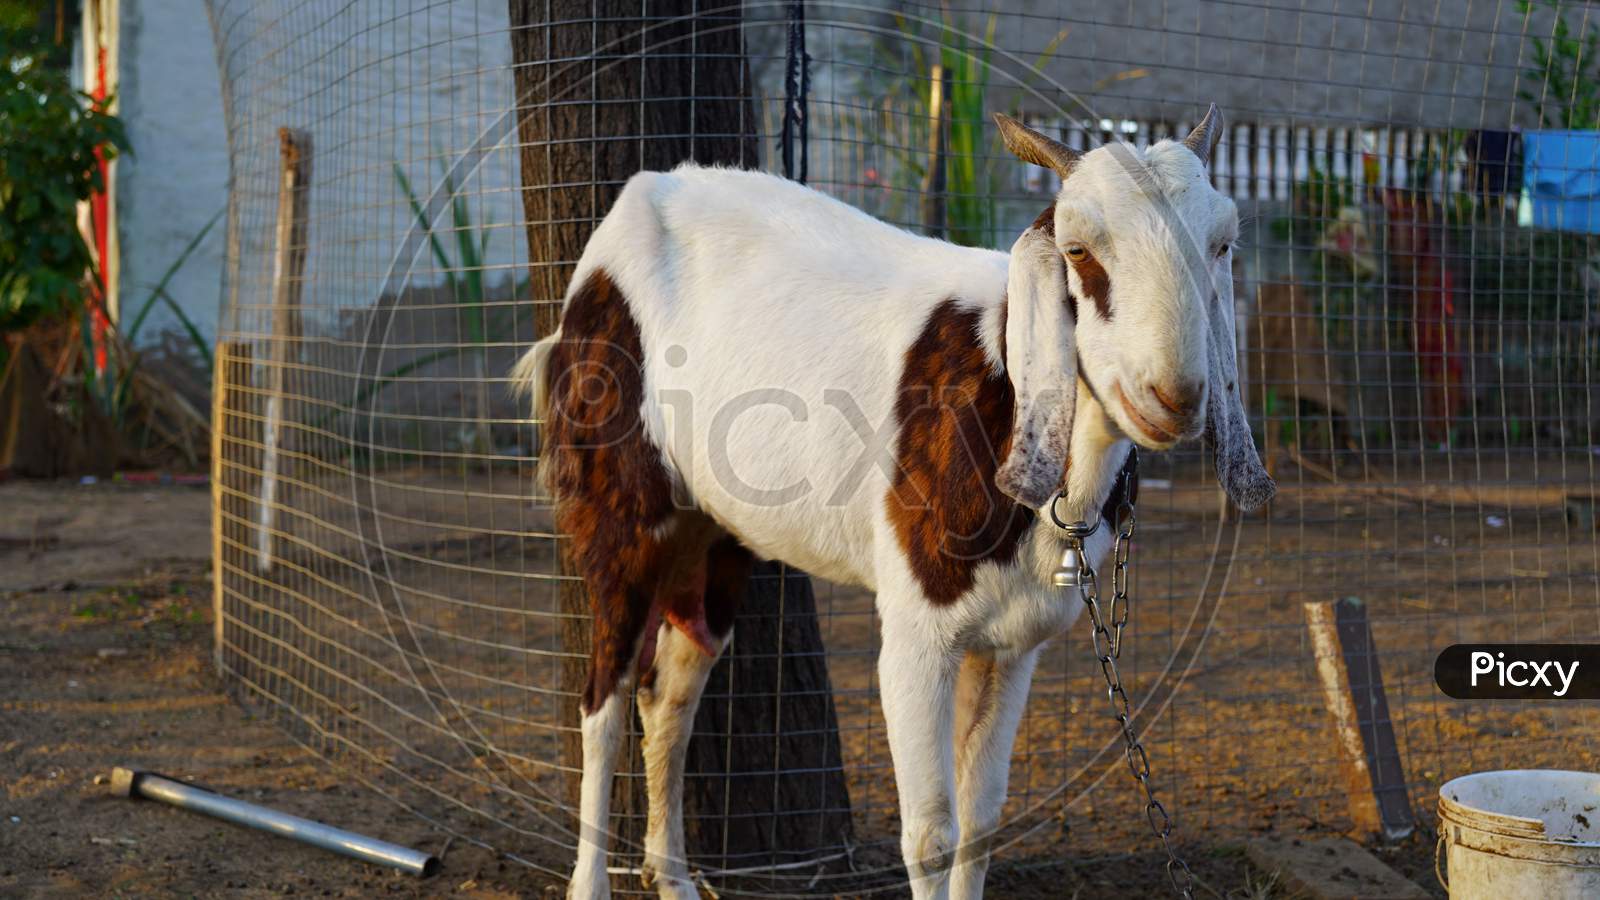 White Innocent Goat Standing Near Iron Fence. Domestic Pets Beetle Species Of Goat, Famous For Milk Purpose, Found In Rajasthan, India.